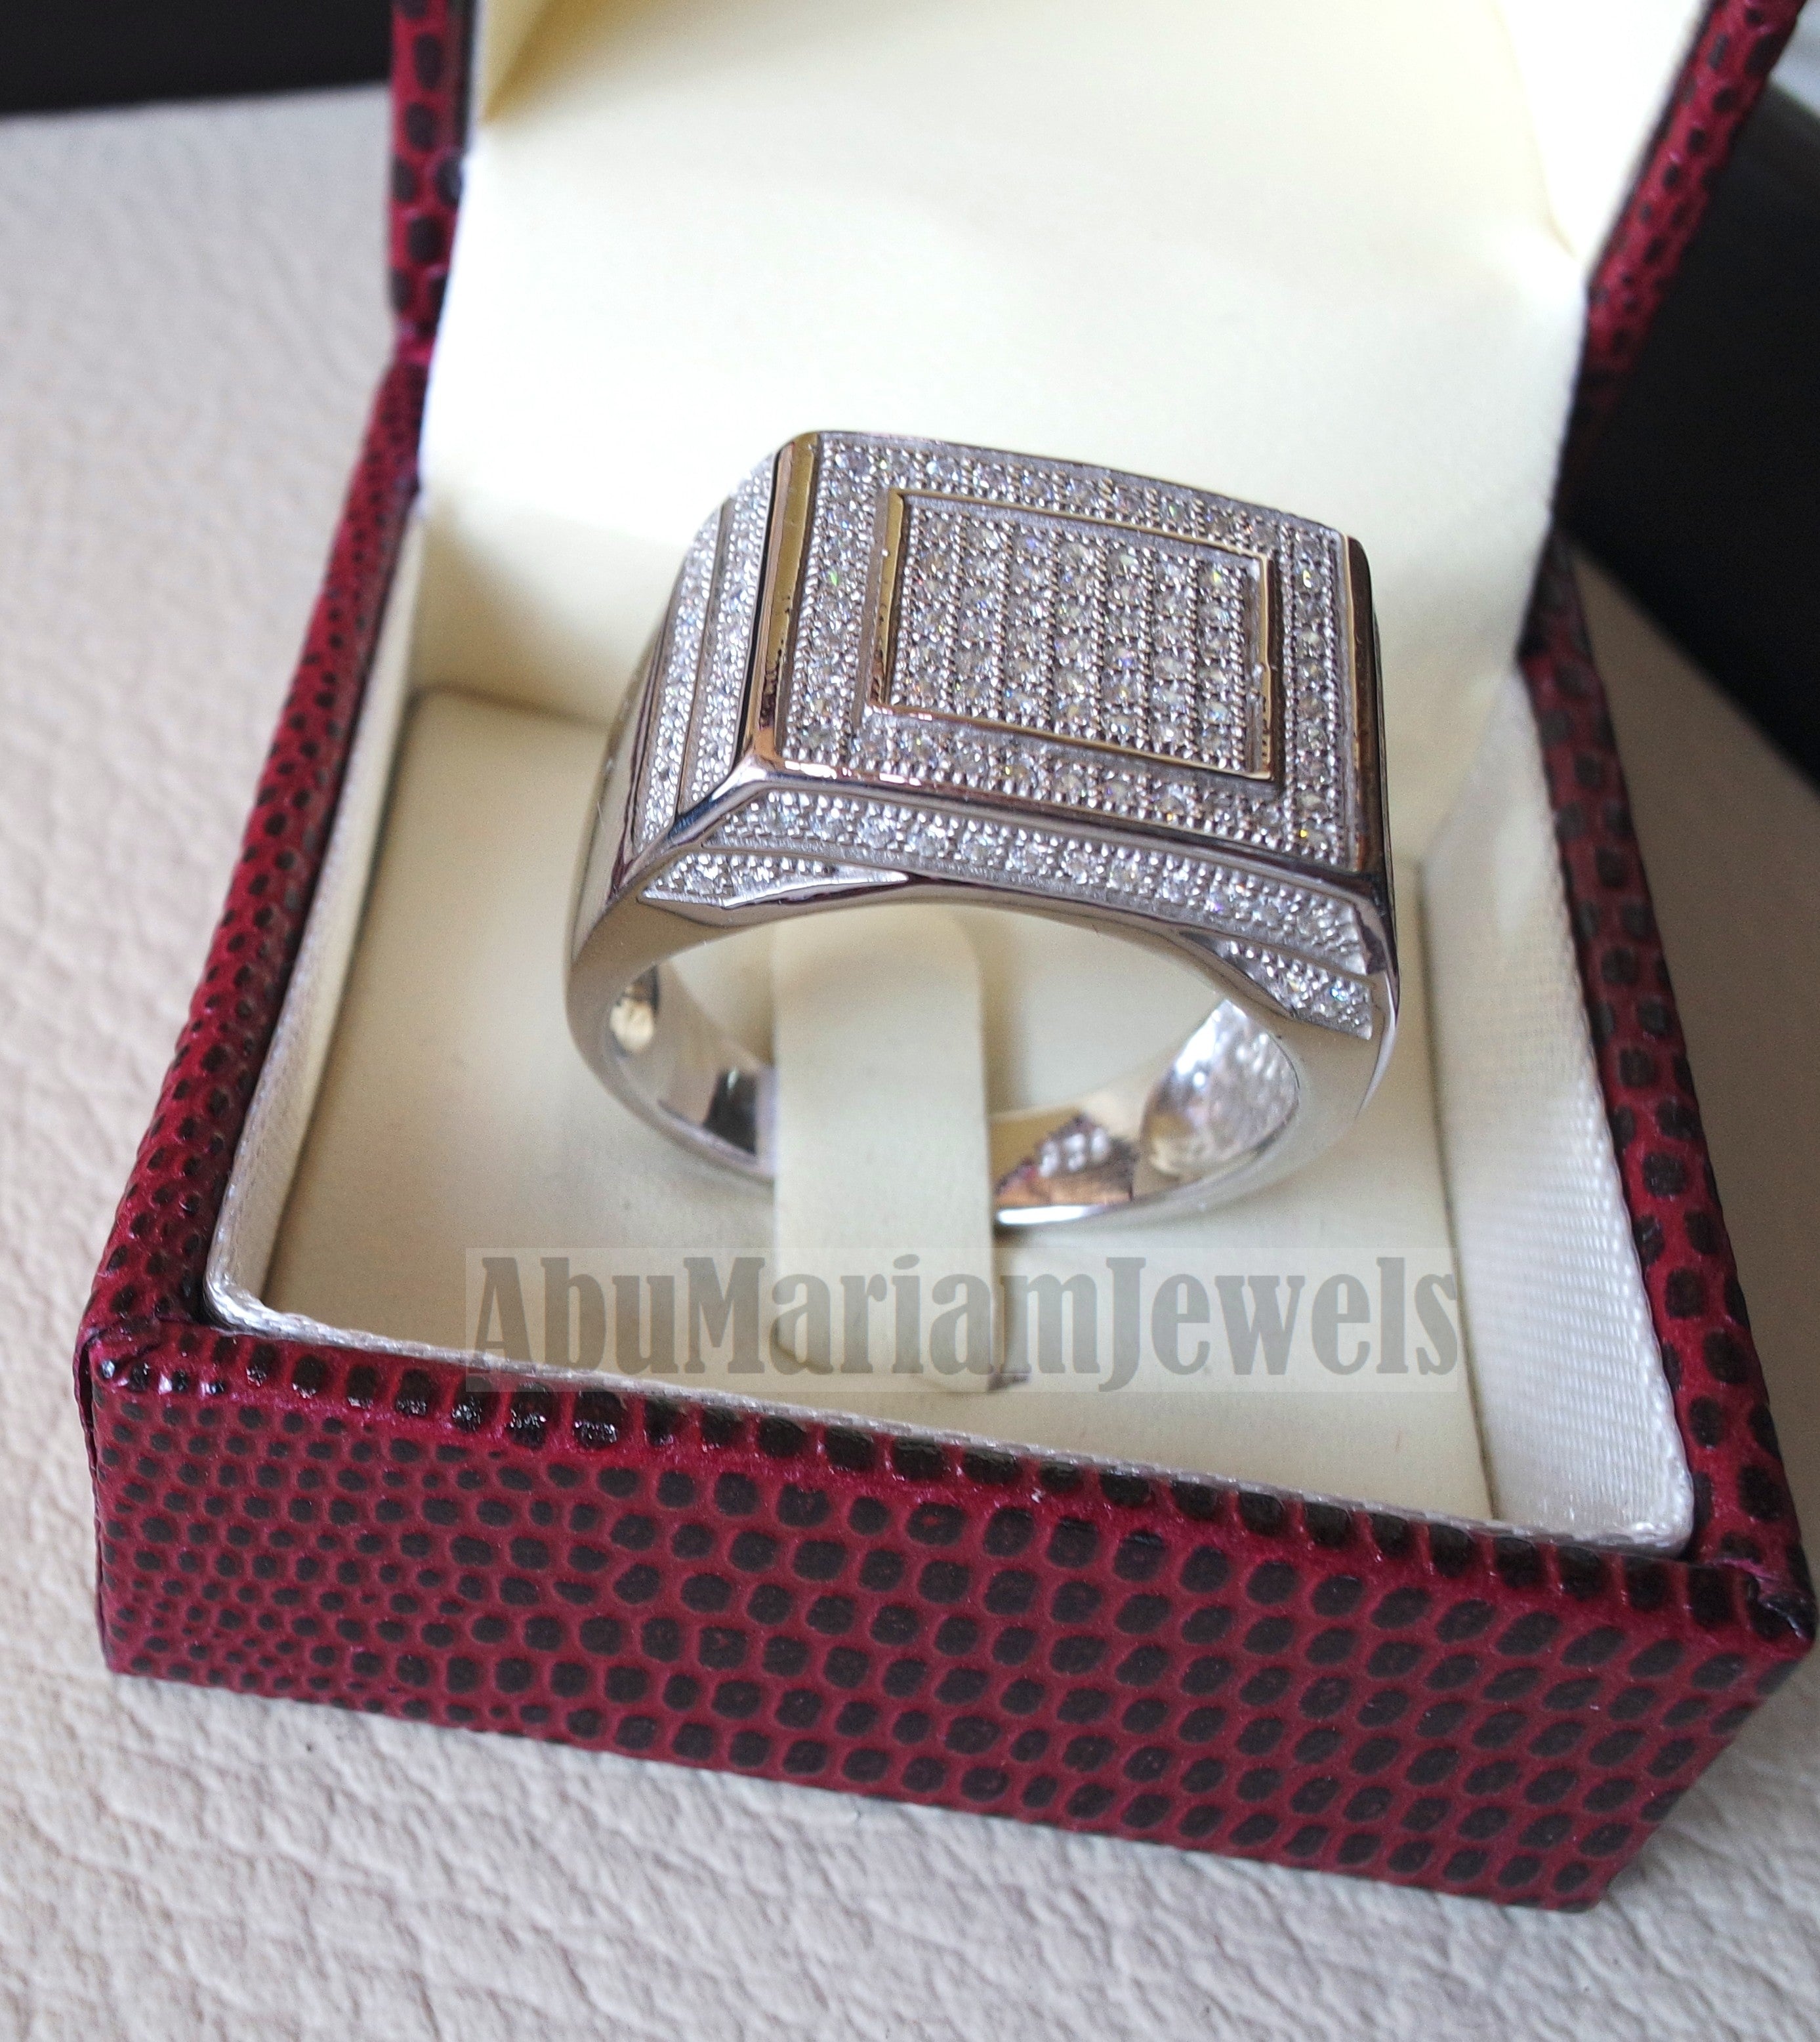 Micro pave cubic zirconia white stones diamond style sterling silver 925 heavy men ring all sizes .